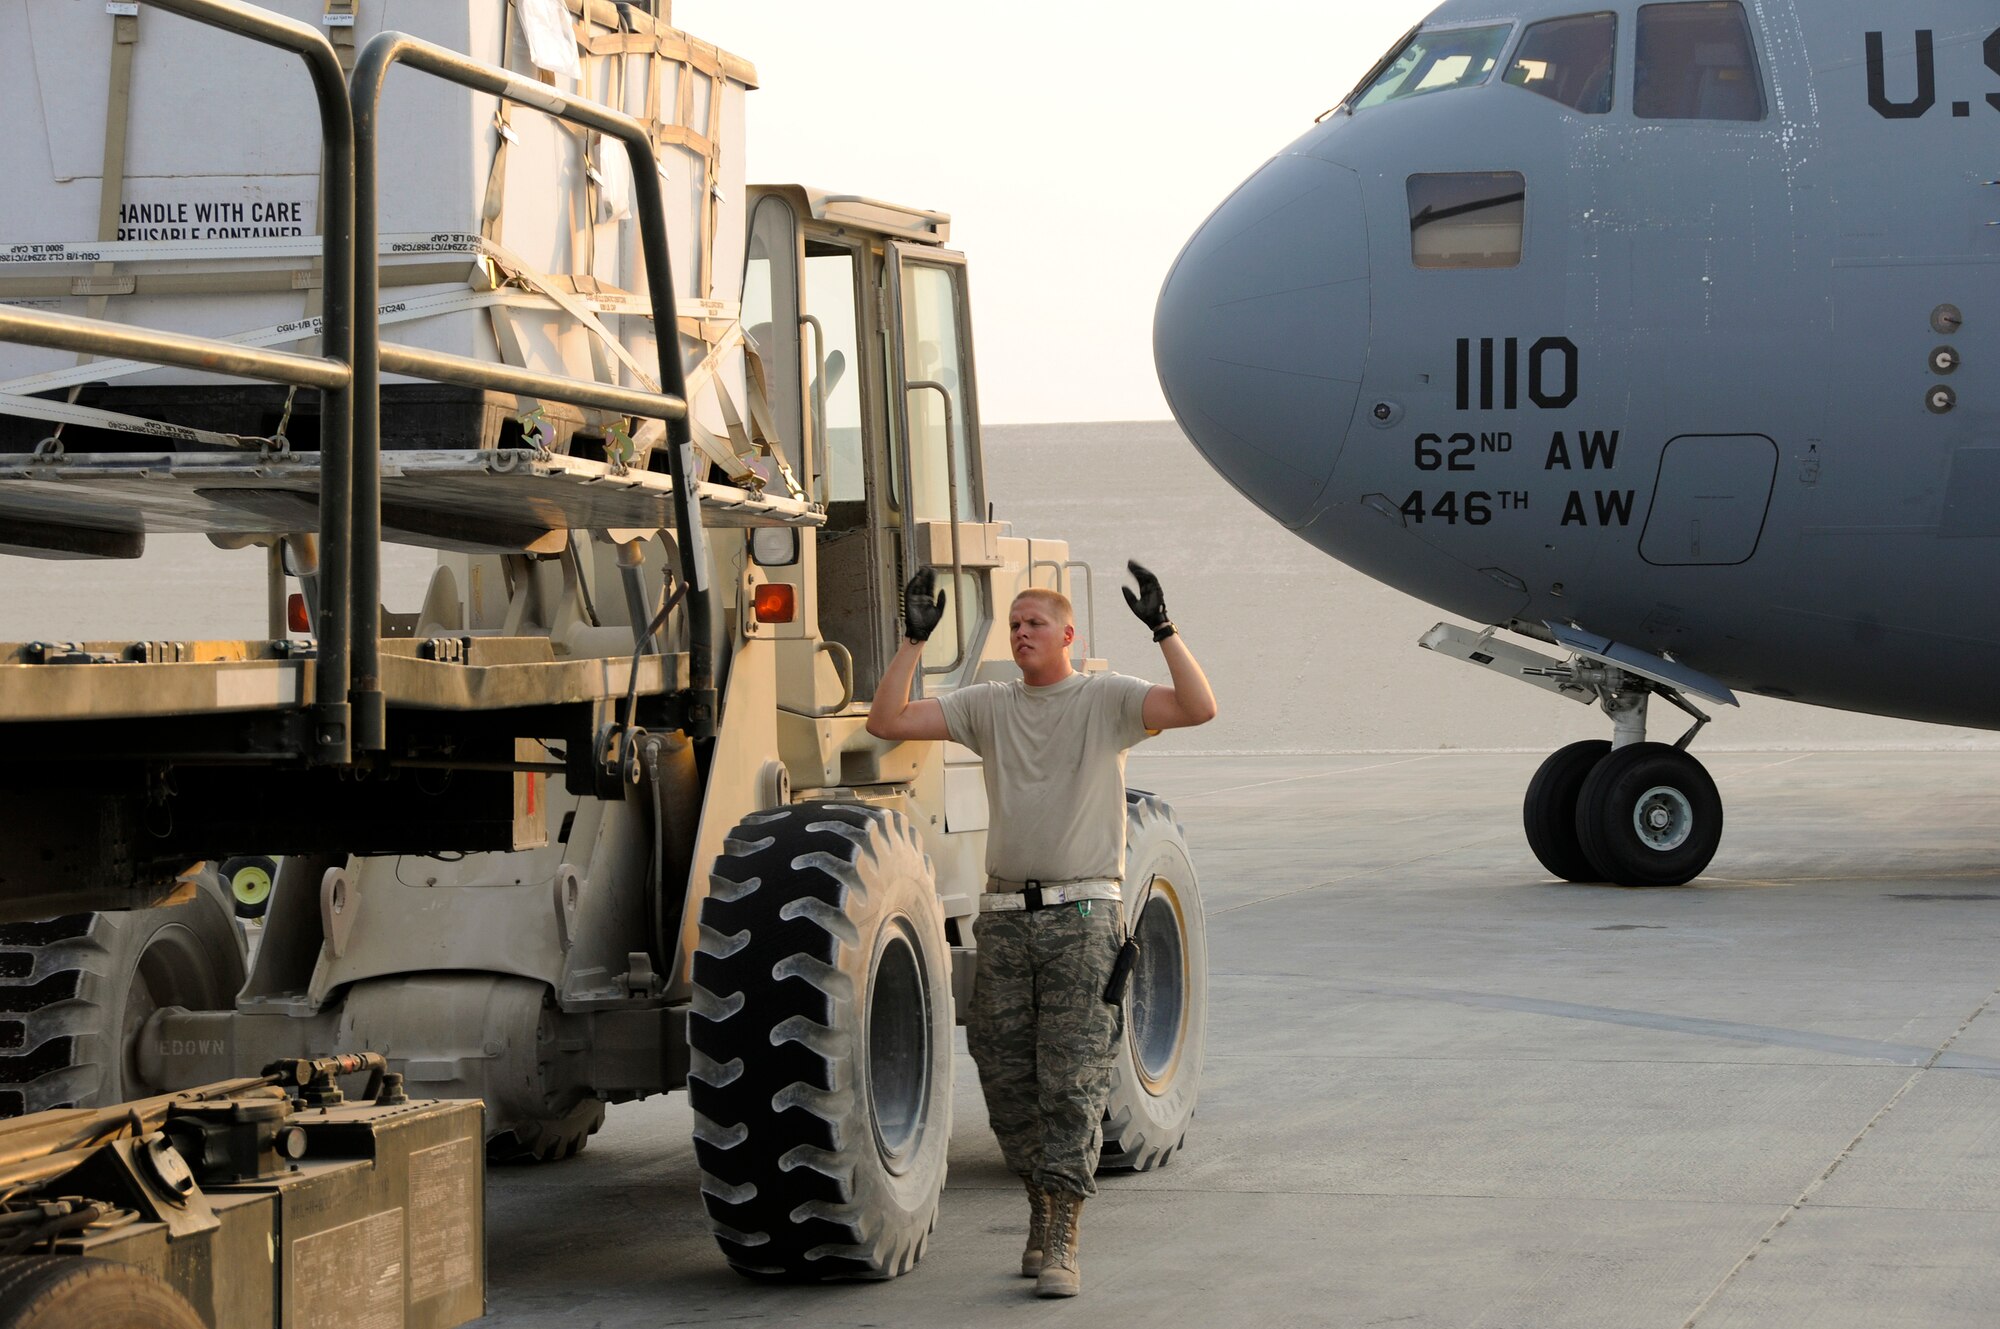 Senior Airman Brett Villar, 8th Expeditionary Air Mobility Squadron, marshals a pallet-laden forklift to a 60K loader Aug. 27, 2008 at an undisclosed air base in Southwest Asia.   Loading a single pallet onto the loader from the forklift is quicker than waiting for the loader to move out of the way, then moving the forklift into position and loading directly into the C-17 Globemaster III.  Airman Villar, a native of Saint Amant, La., is deployed from Charleston Air Force Base, S.C., in support of Operations Iraqi and Enduring Freedom and Joint Task Force-Horn of Africa.  (U.S. Air Force photo by Tech. Sgt. Michael Boquette/Released)